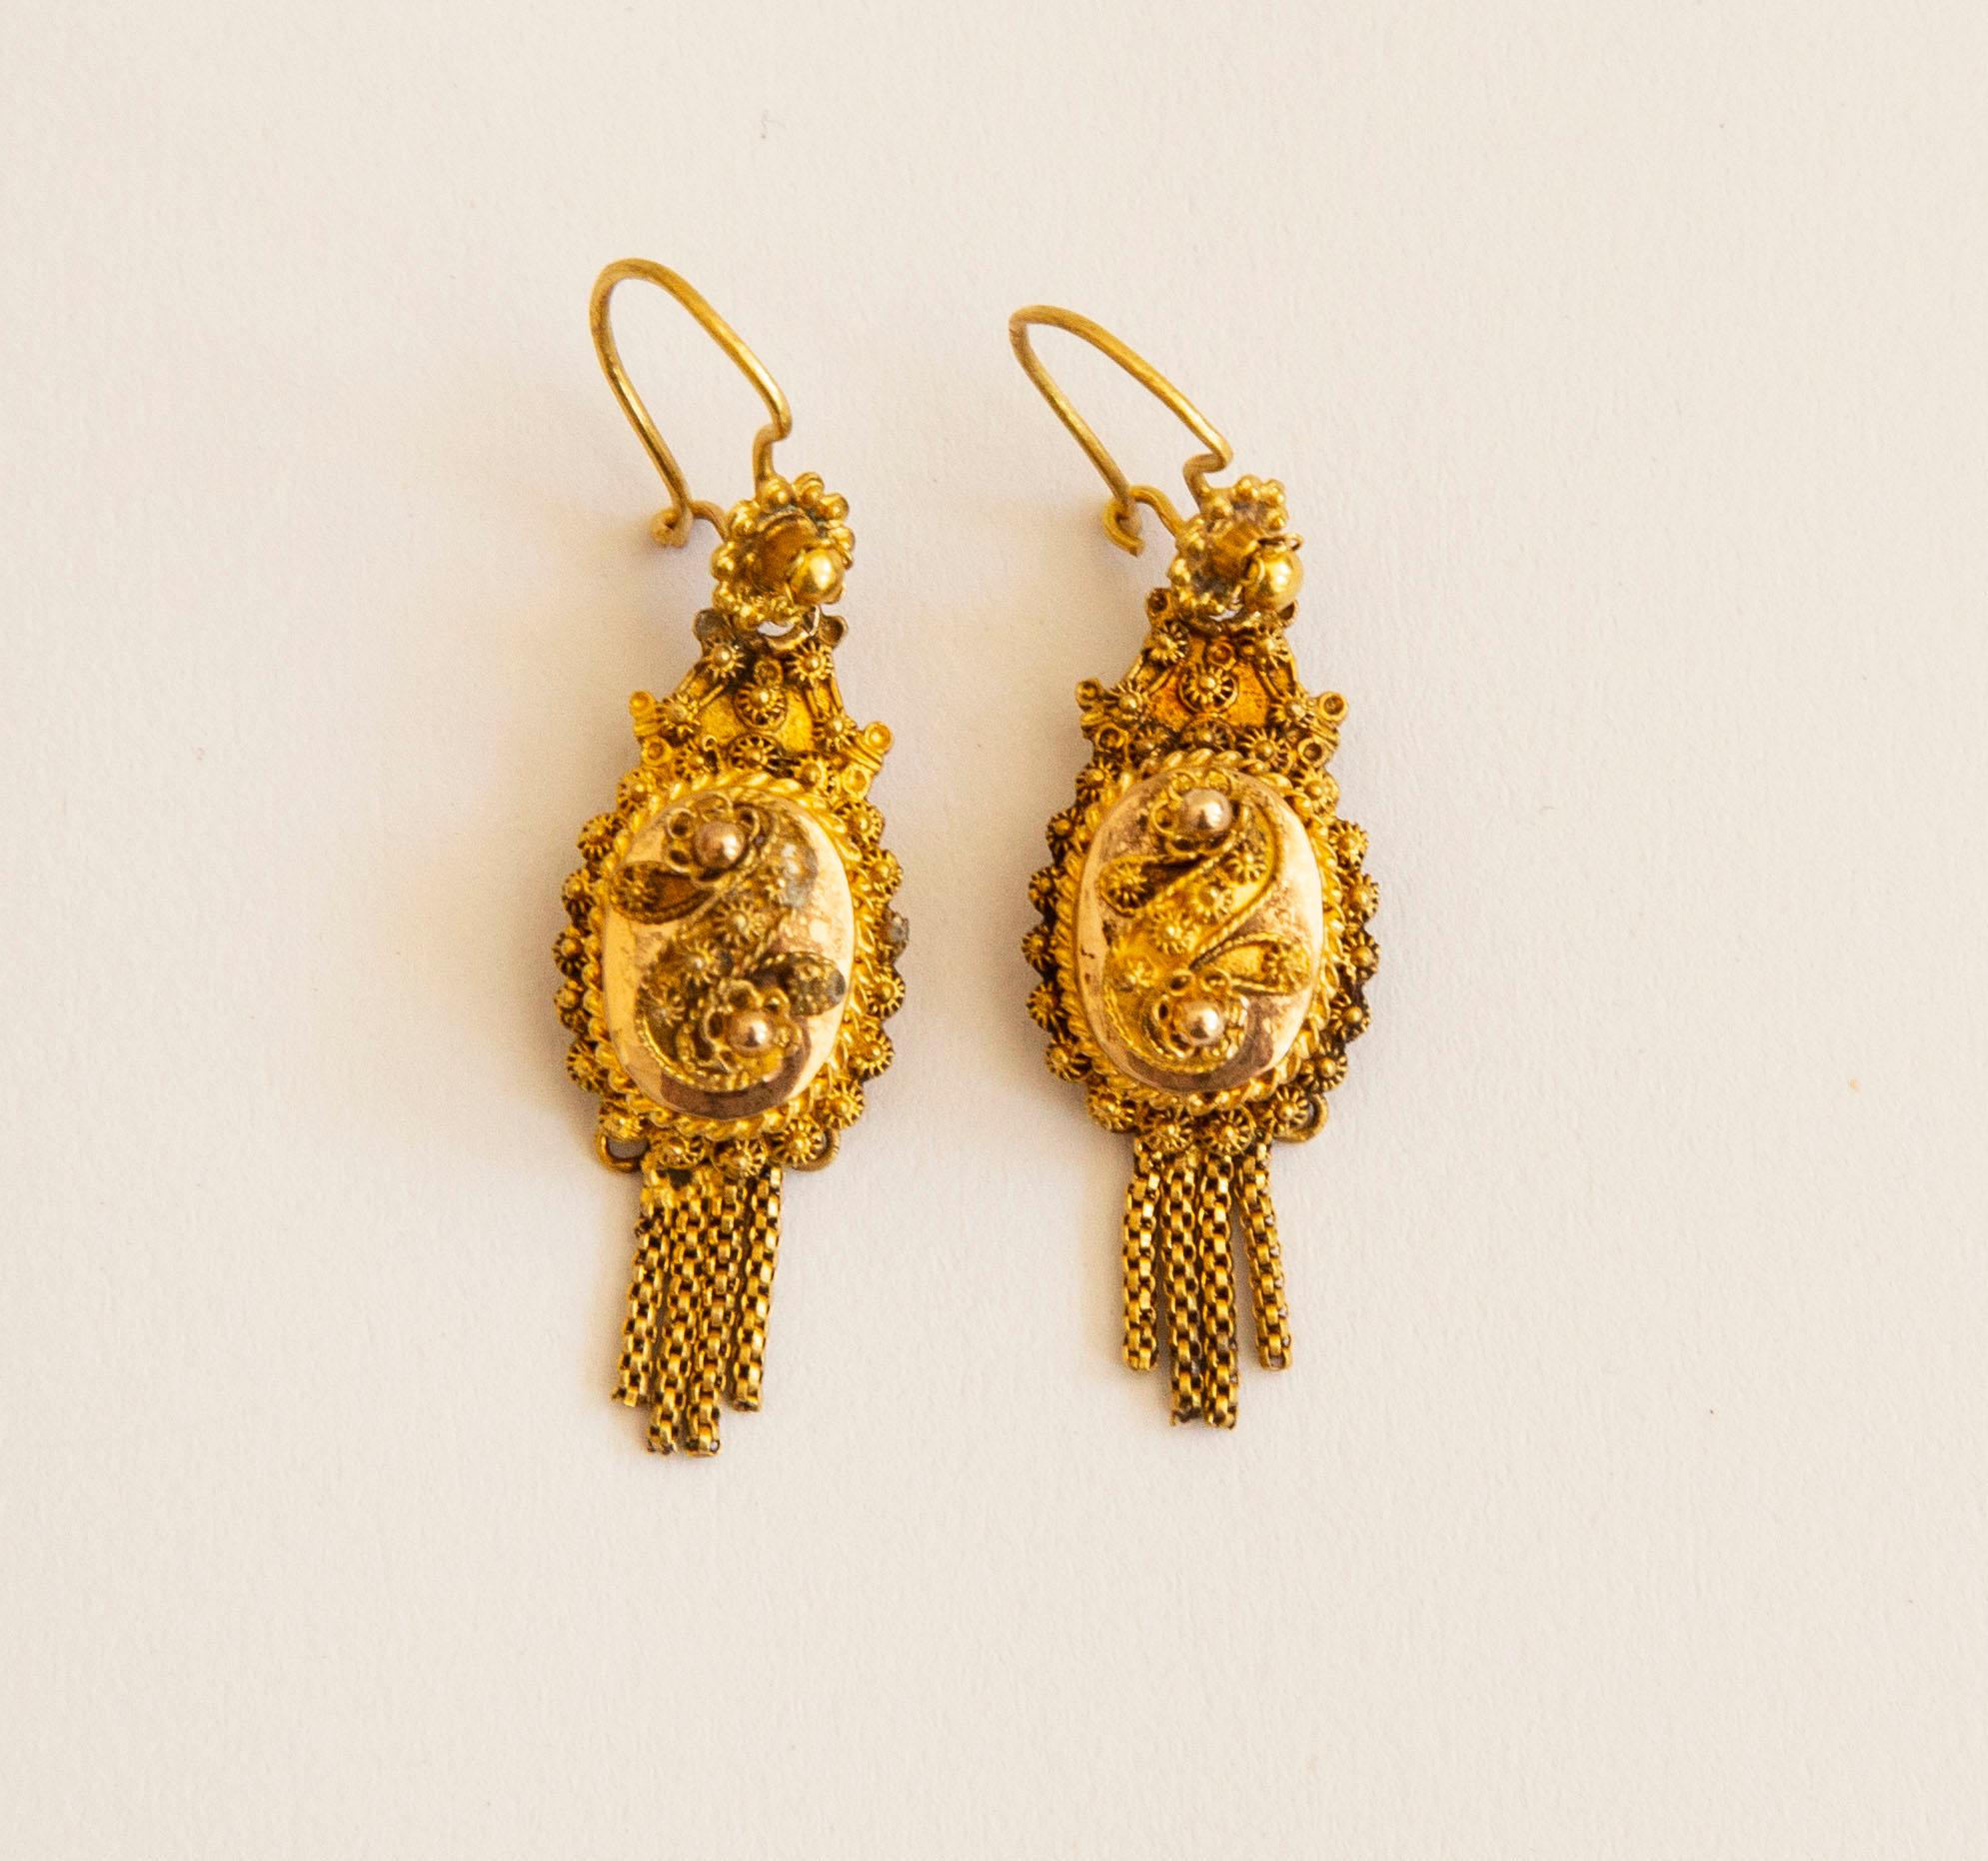 Antique Dutch 14 karat yellow gold dangle earrings made with filigree technique. Filigree is a very refined technique that uses a thin golden thread to form a lace-like pattern. Each earring features very sophisticated floral decoration and it is